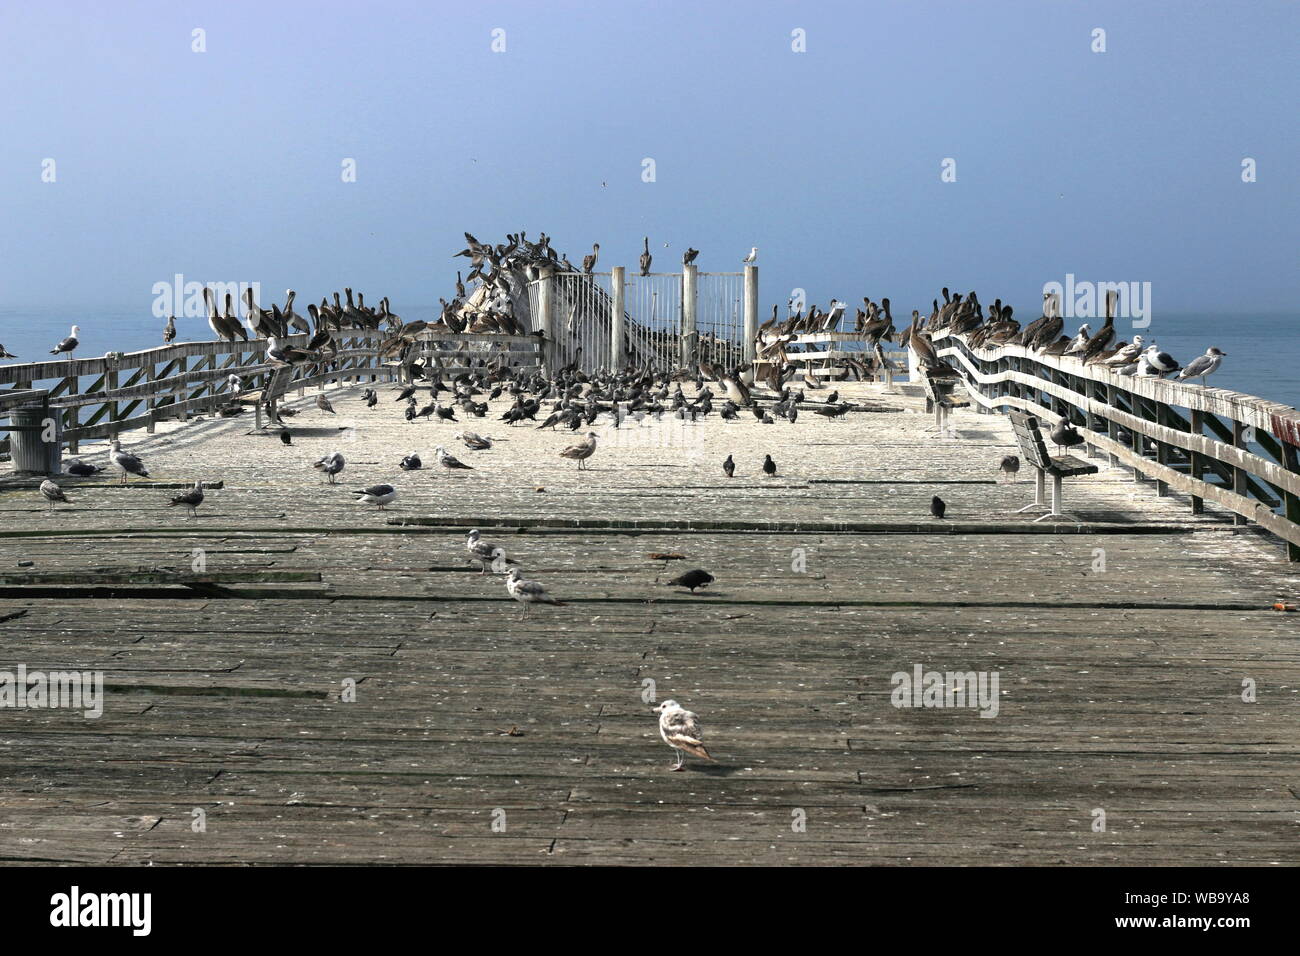 Masses of birds gather at the end of the pier, Seacliff State Park, CA. Stock Photo